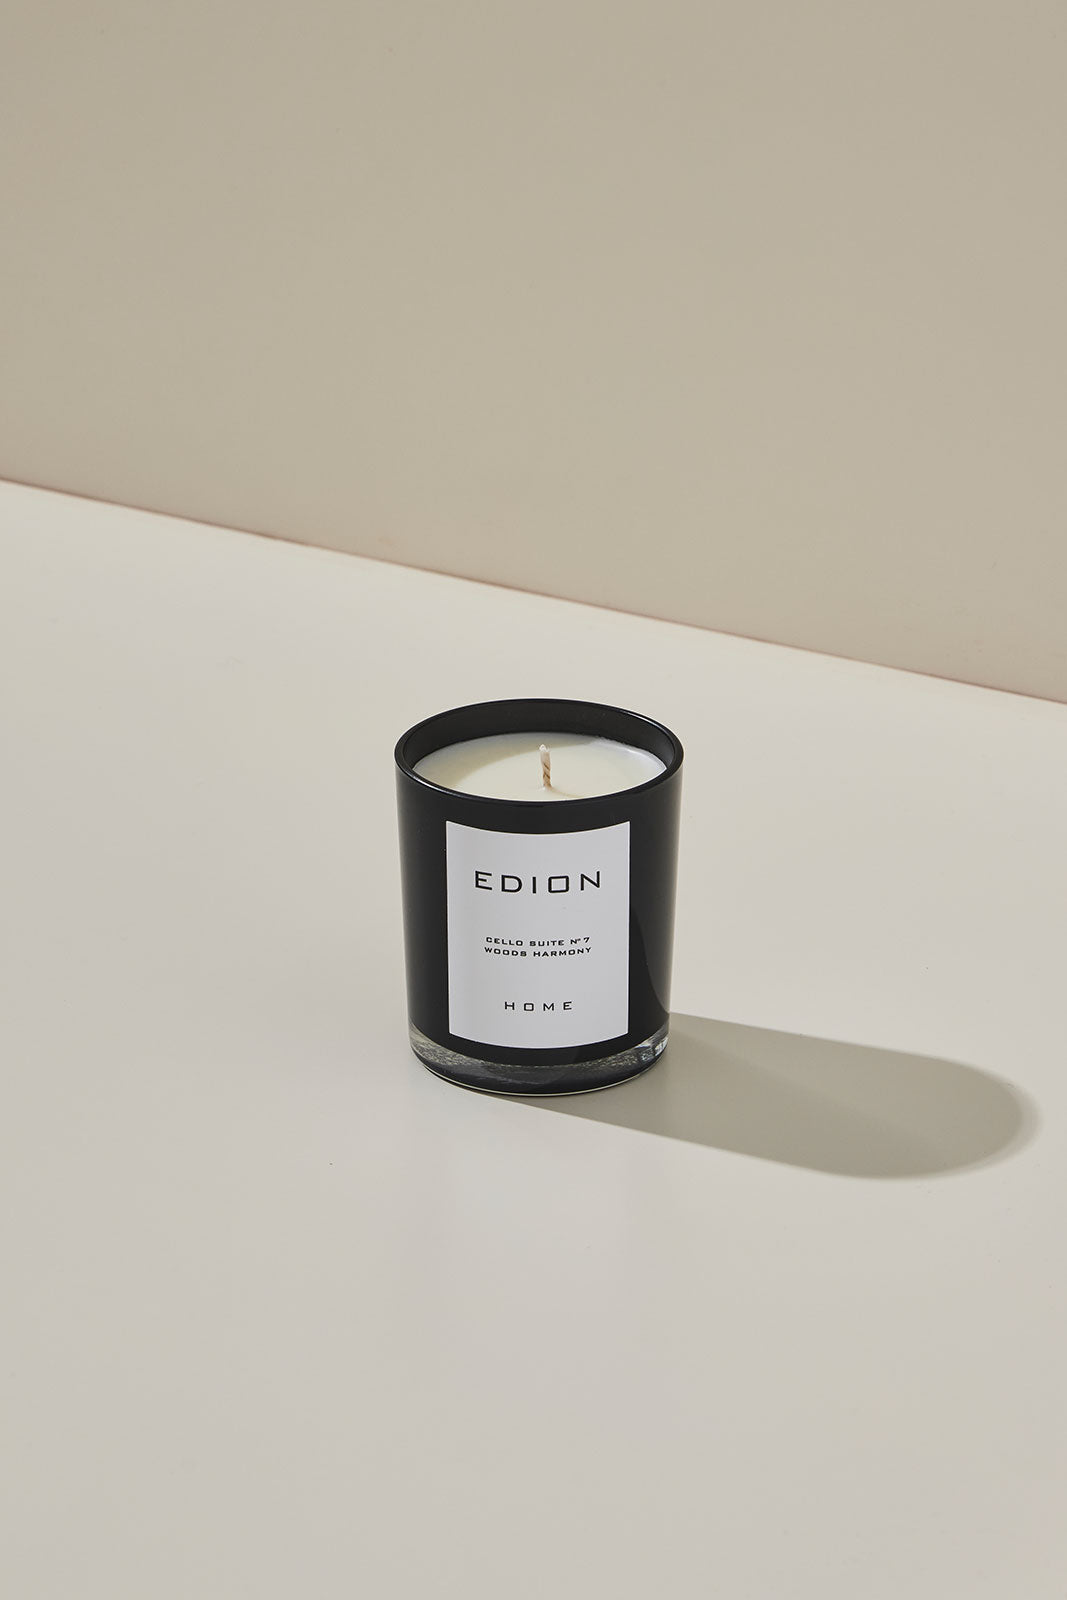 Scented candle Cello suite n.7 woods harmony